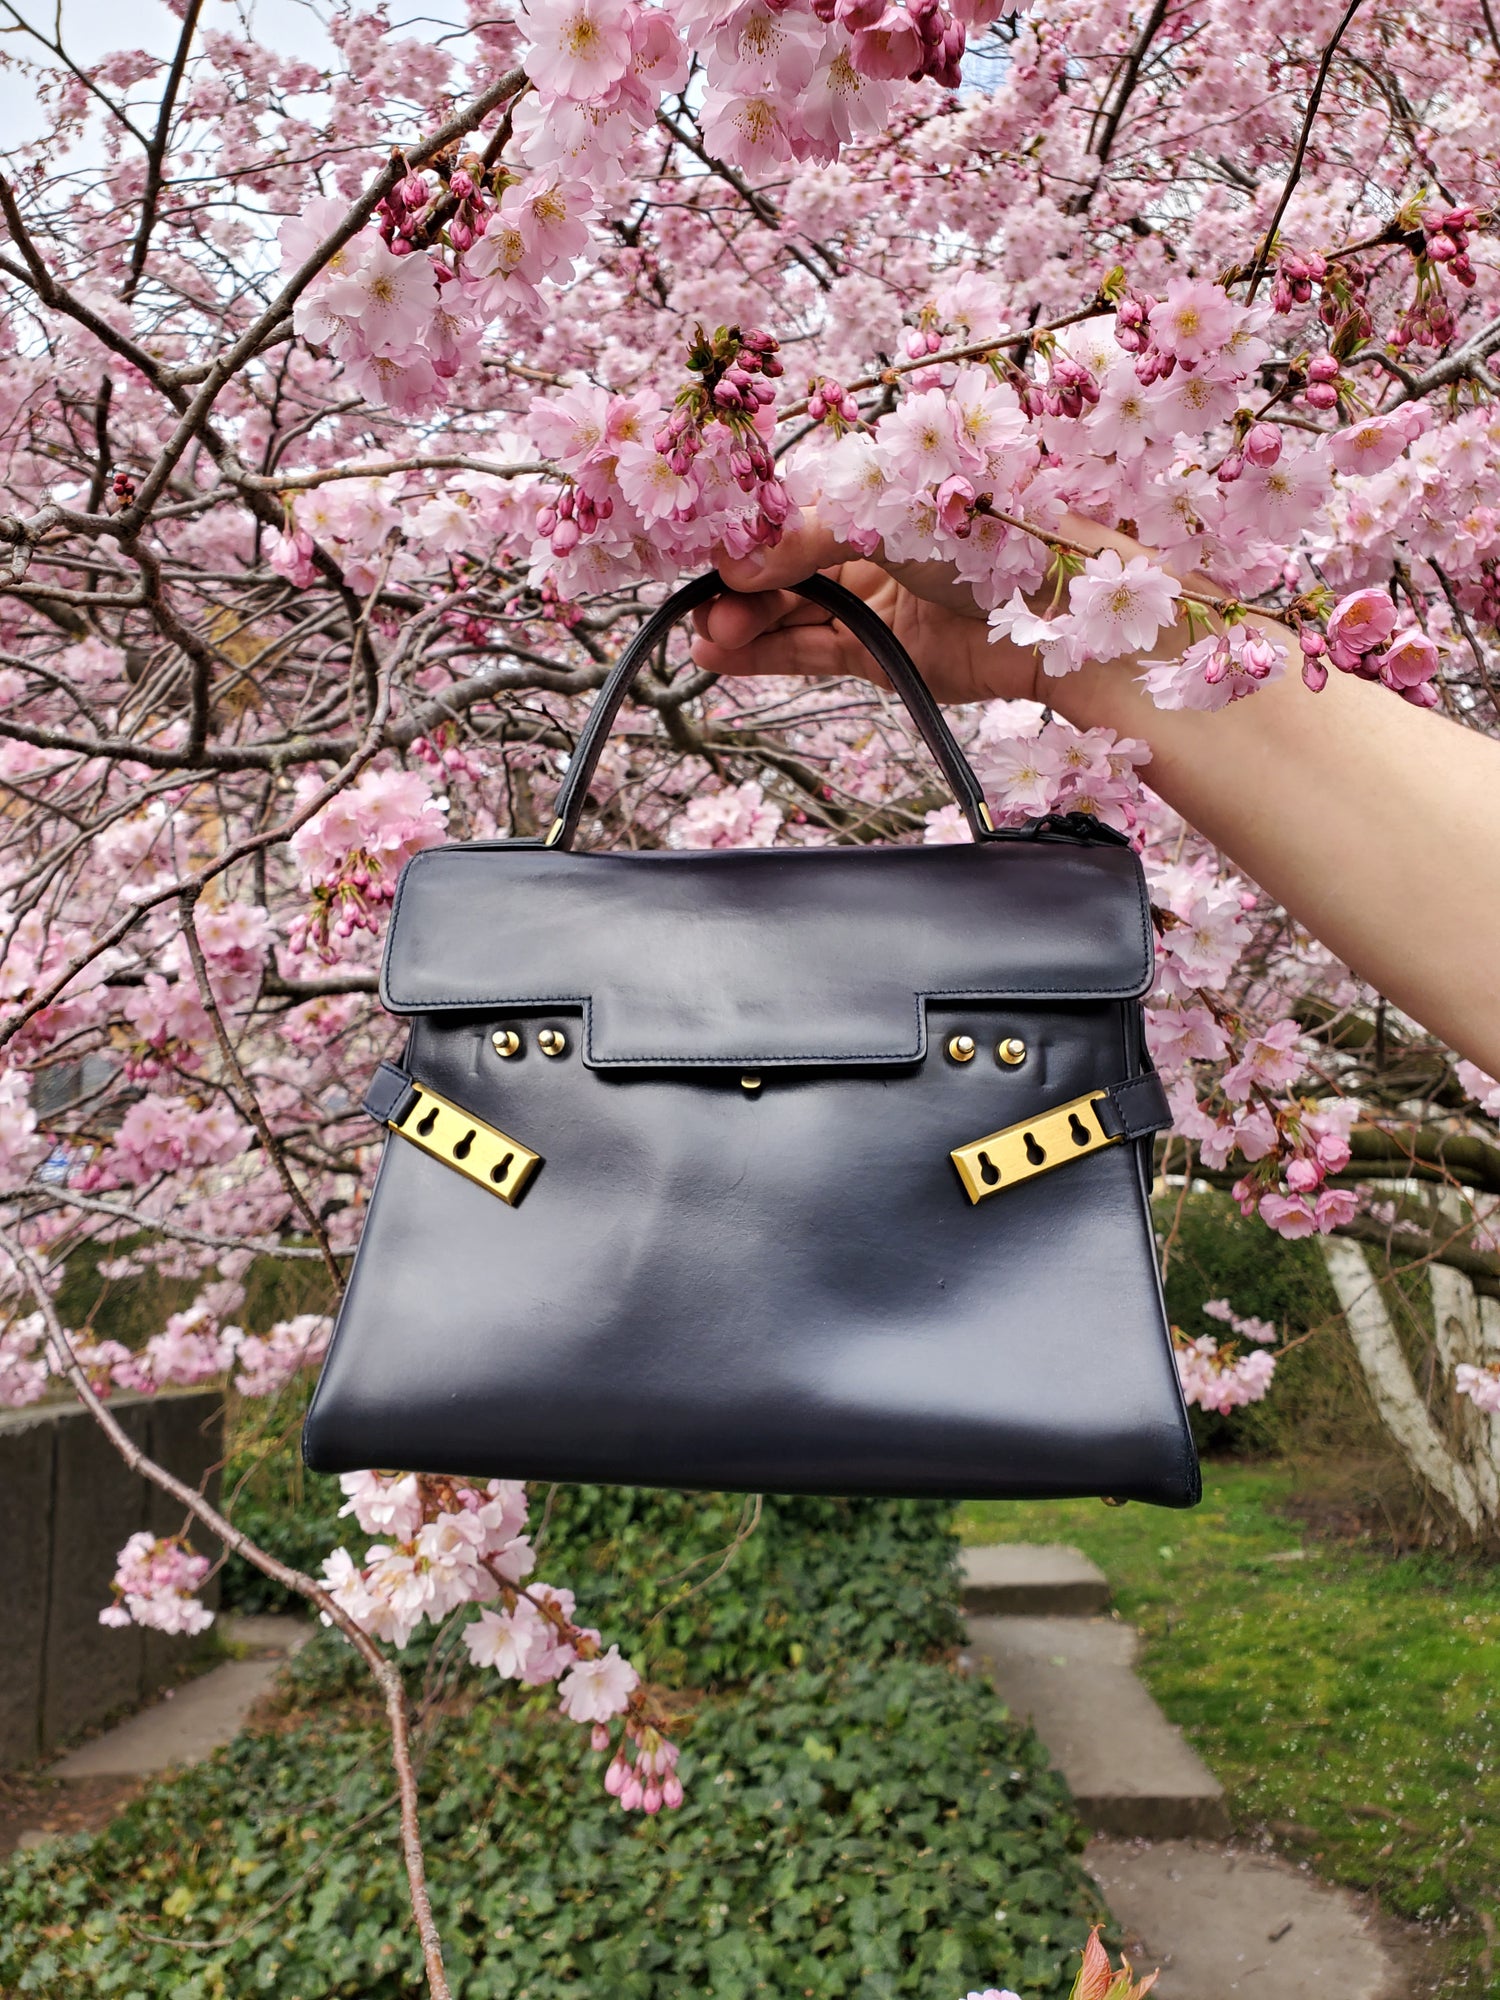 Delvaux Leather Bag 